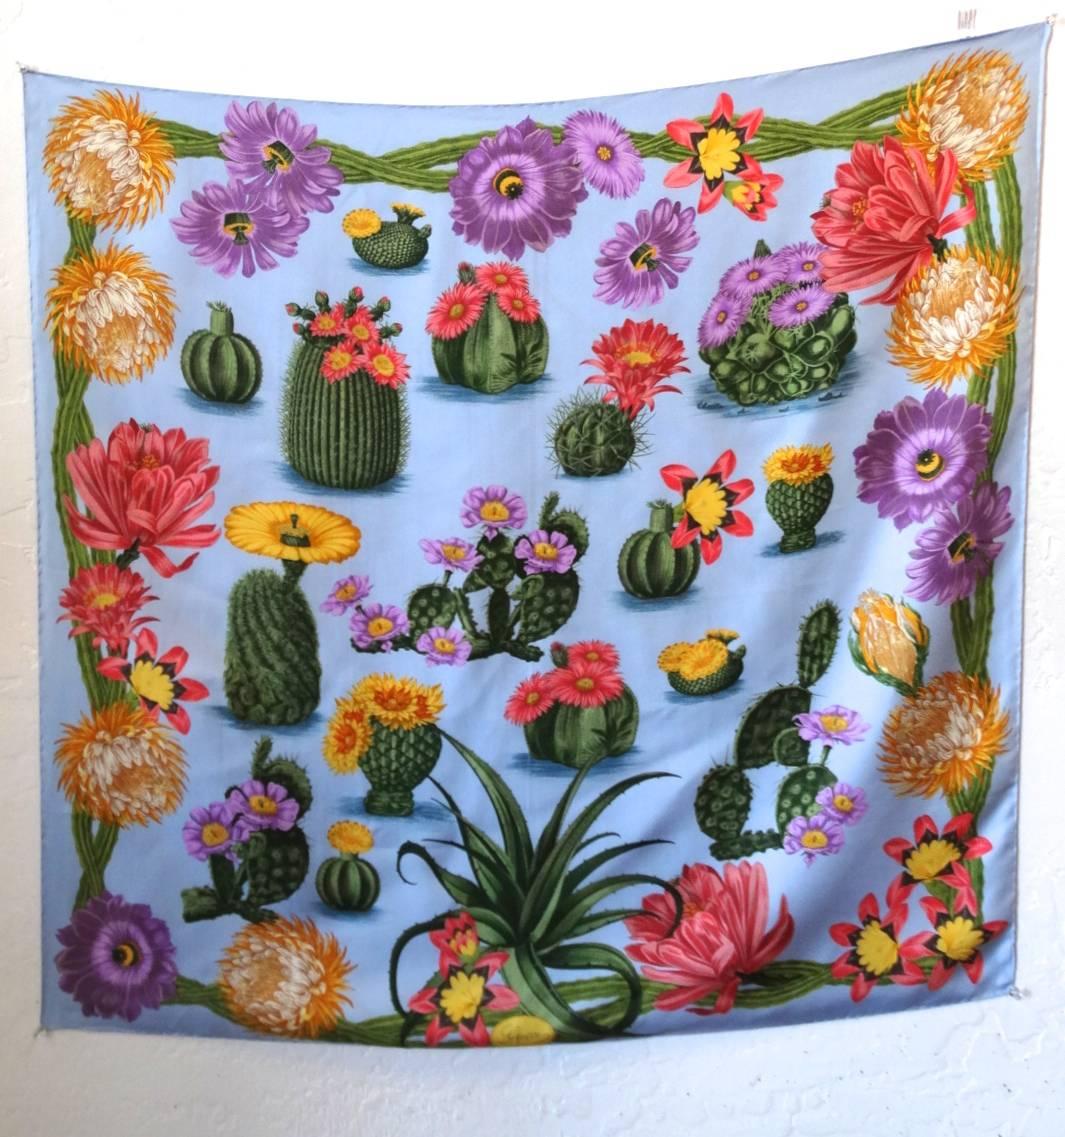 From the Gucci Cacti Flora Capsule Collection, this rare Gucci Cacti Silk Scarf is the most adorable piece to add to any outfit! The beautiful light blue is the perfect background color for the array of vivid Cacti. Show off this novelty scarf as a